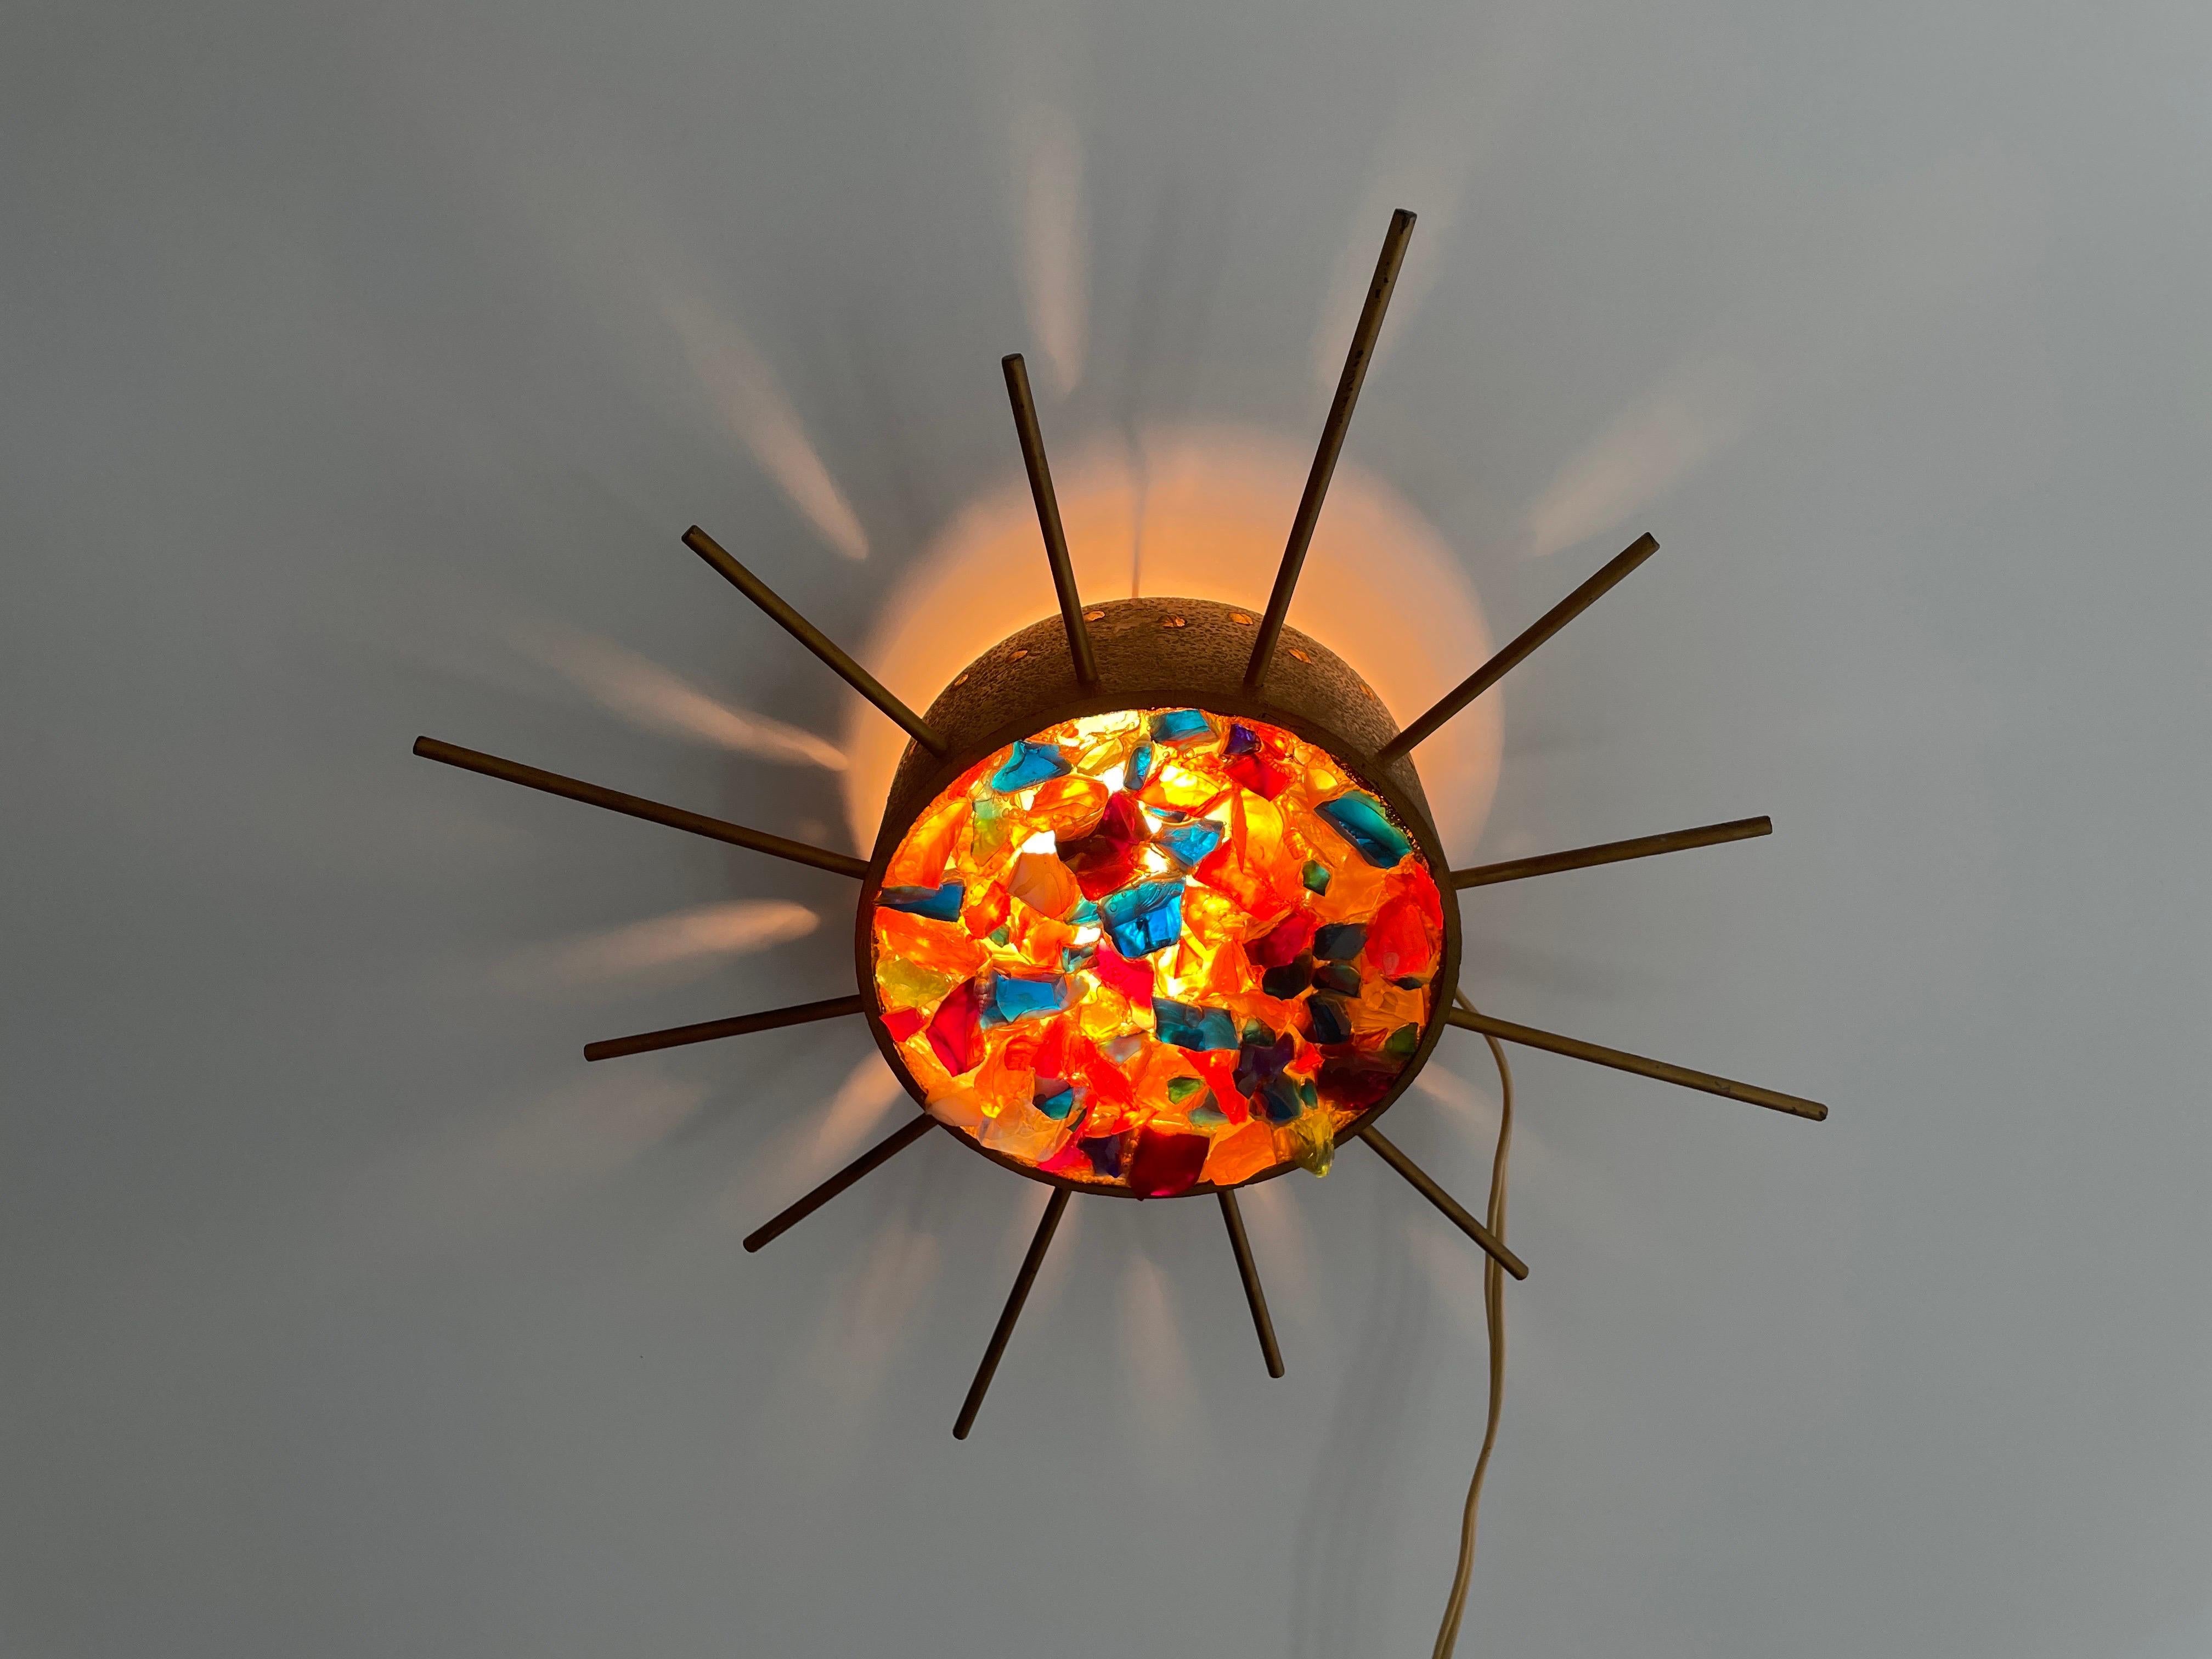 Sunburst Design Colorful Glass Pieces in Stone Form Wall Lamp, 1960s, Germany For Sale 3